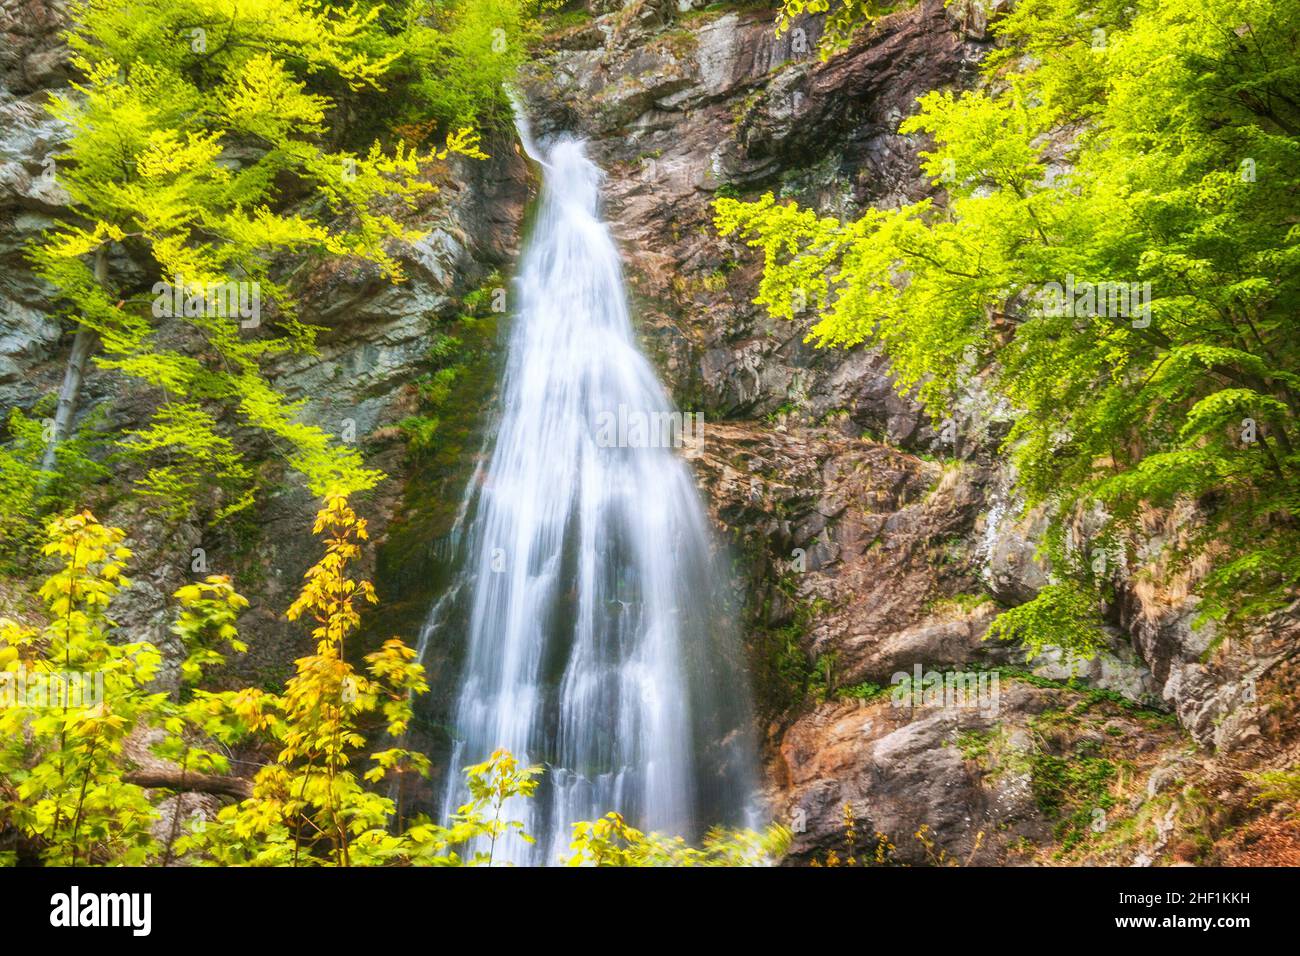 The mighty waterfall in Sutovo at Slovakia, Europe. Stock Photo